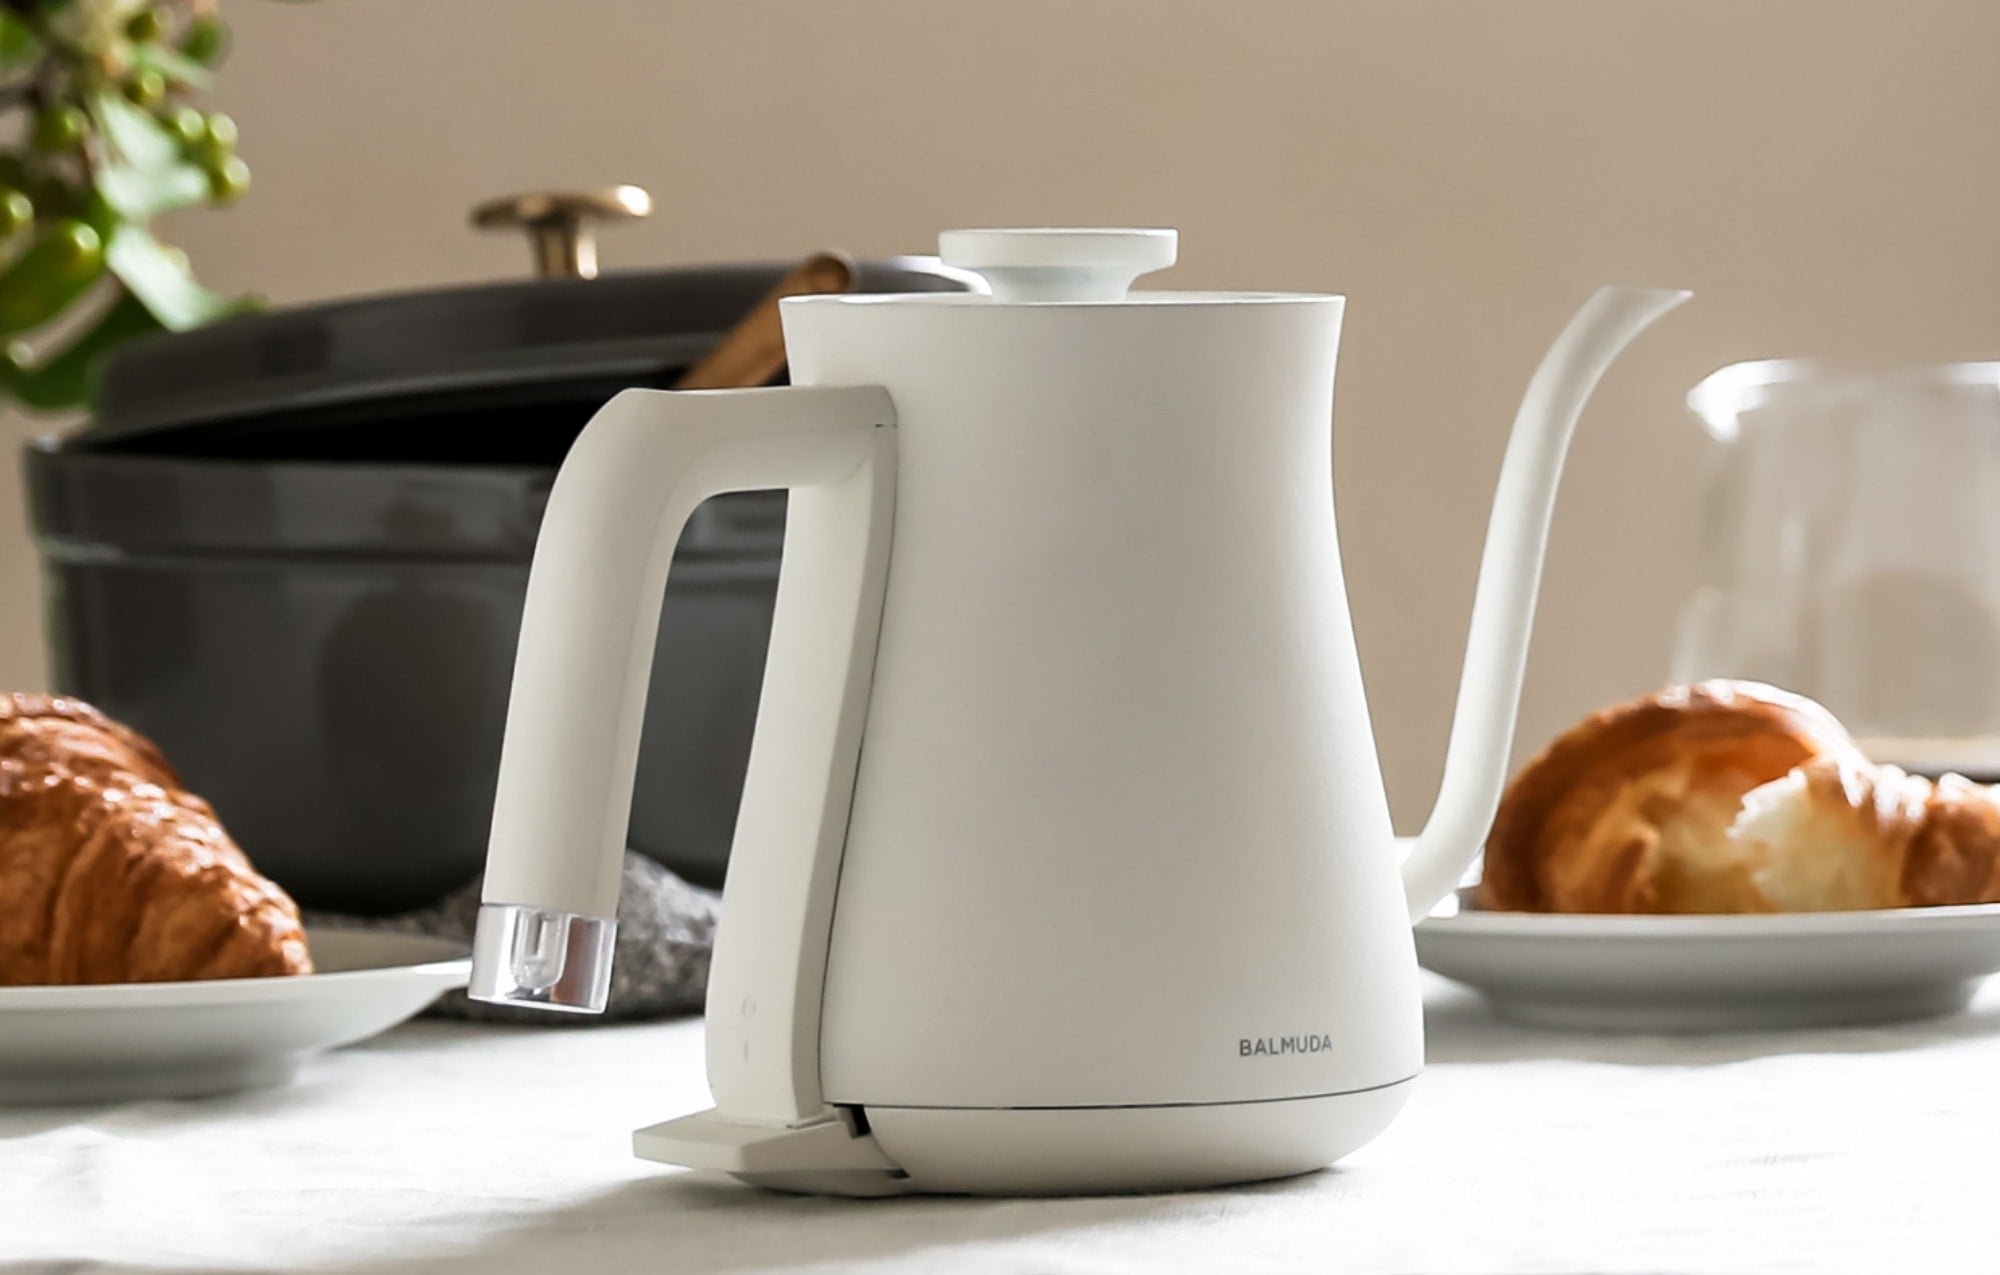 BALMUDA Combo Pack in White | BALMUDA The Toaster & BALMUDA The Kettle |  Steam Toaster and Electric Gooseneck Kettle | White Combo